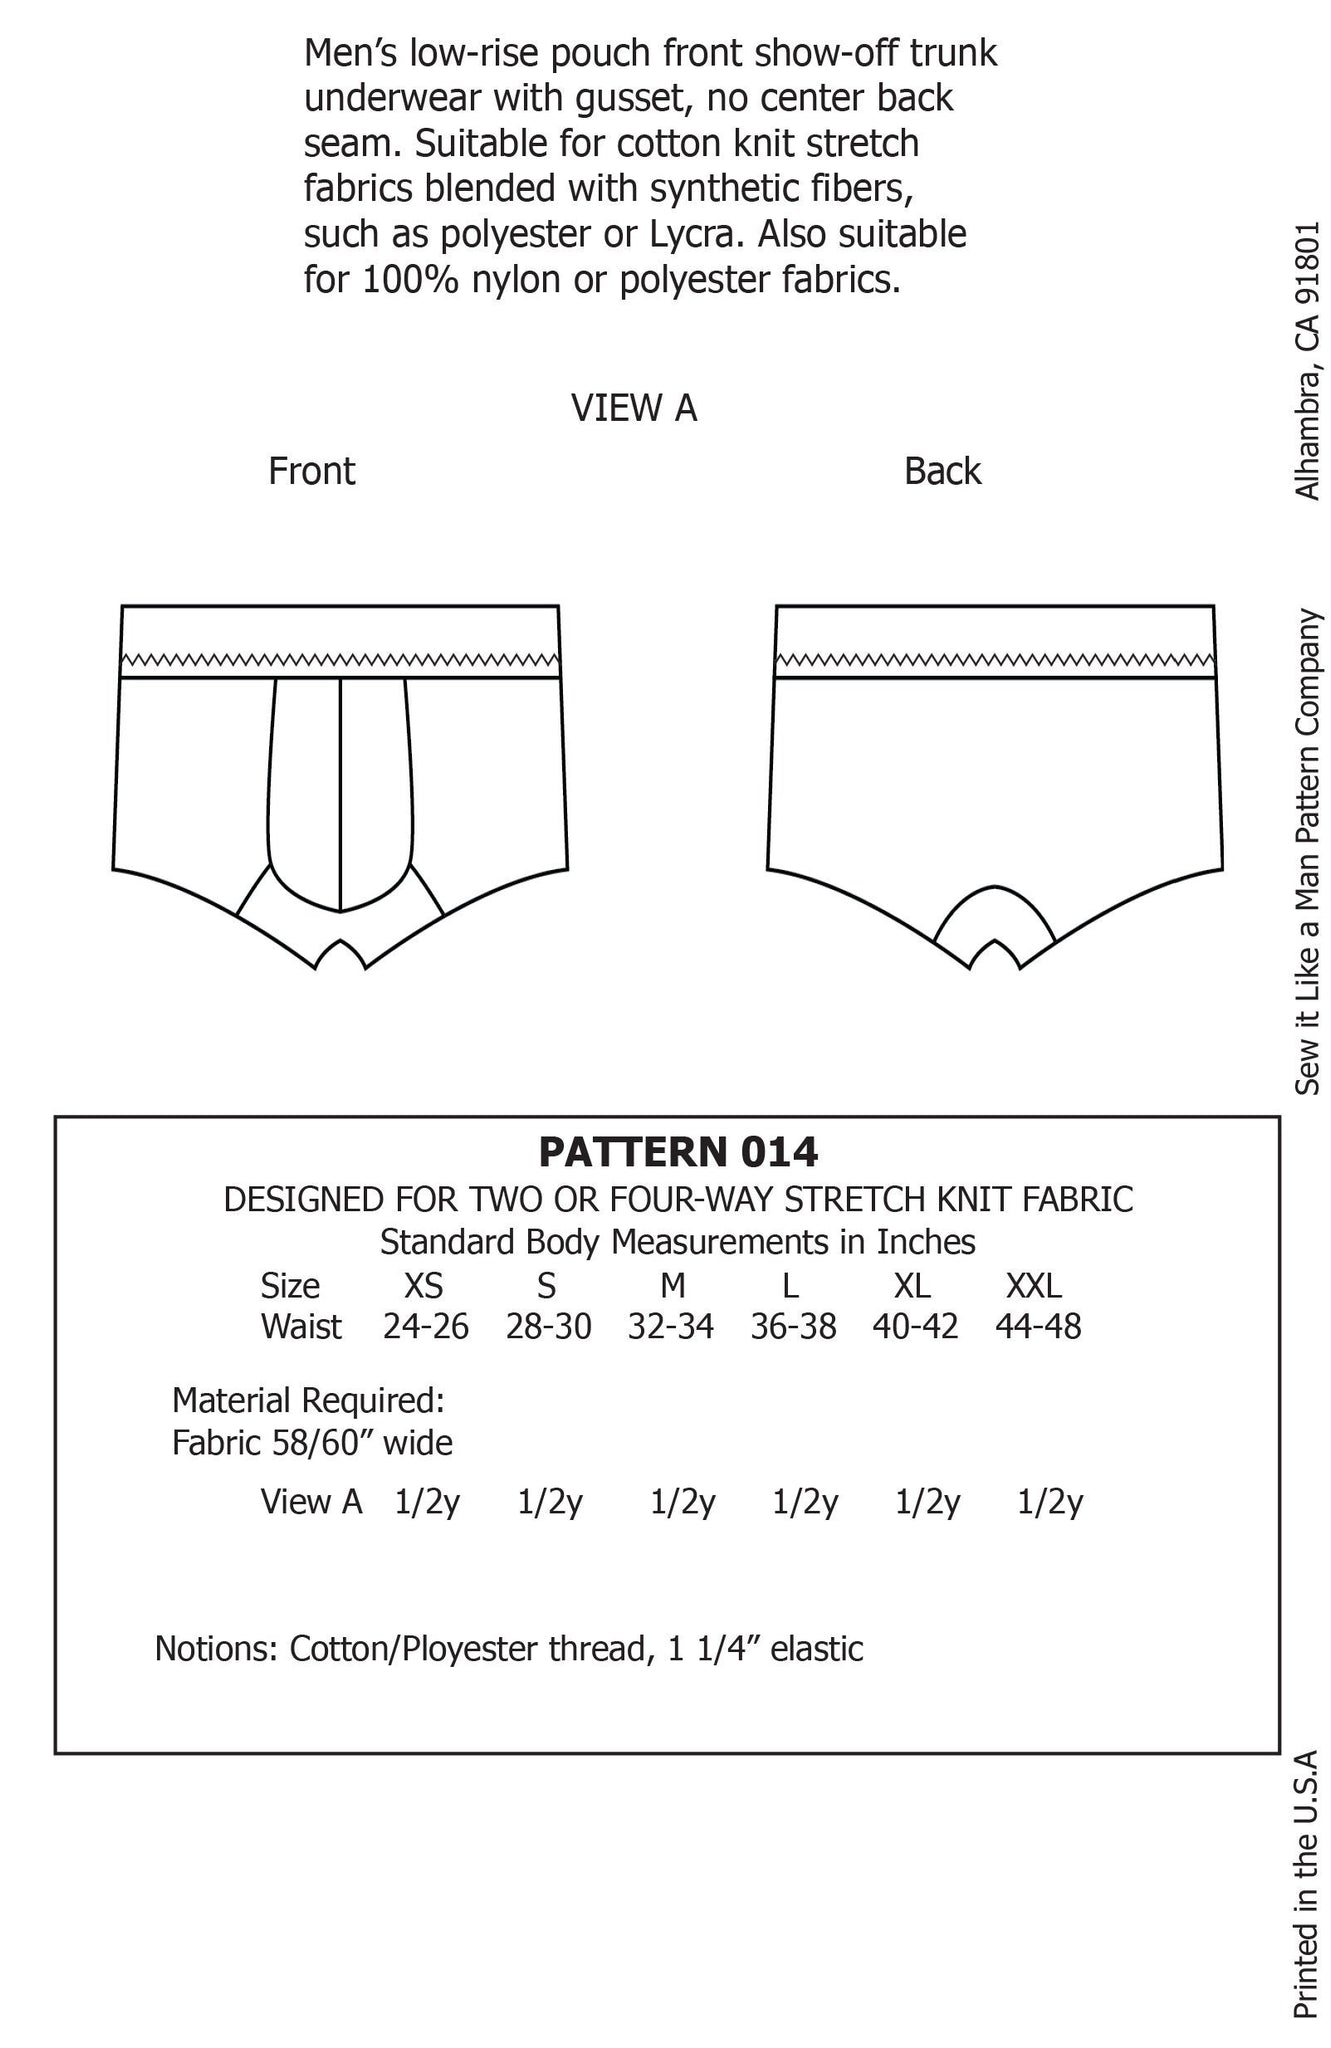 Men's Low-Rise Show-Off Boxer Brief Sewing Pattern PDF – Sew It Like A Man